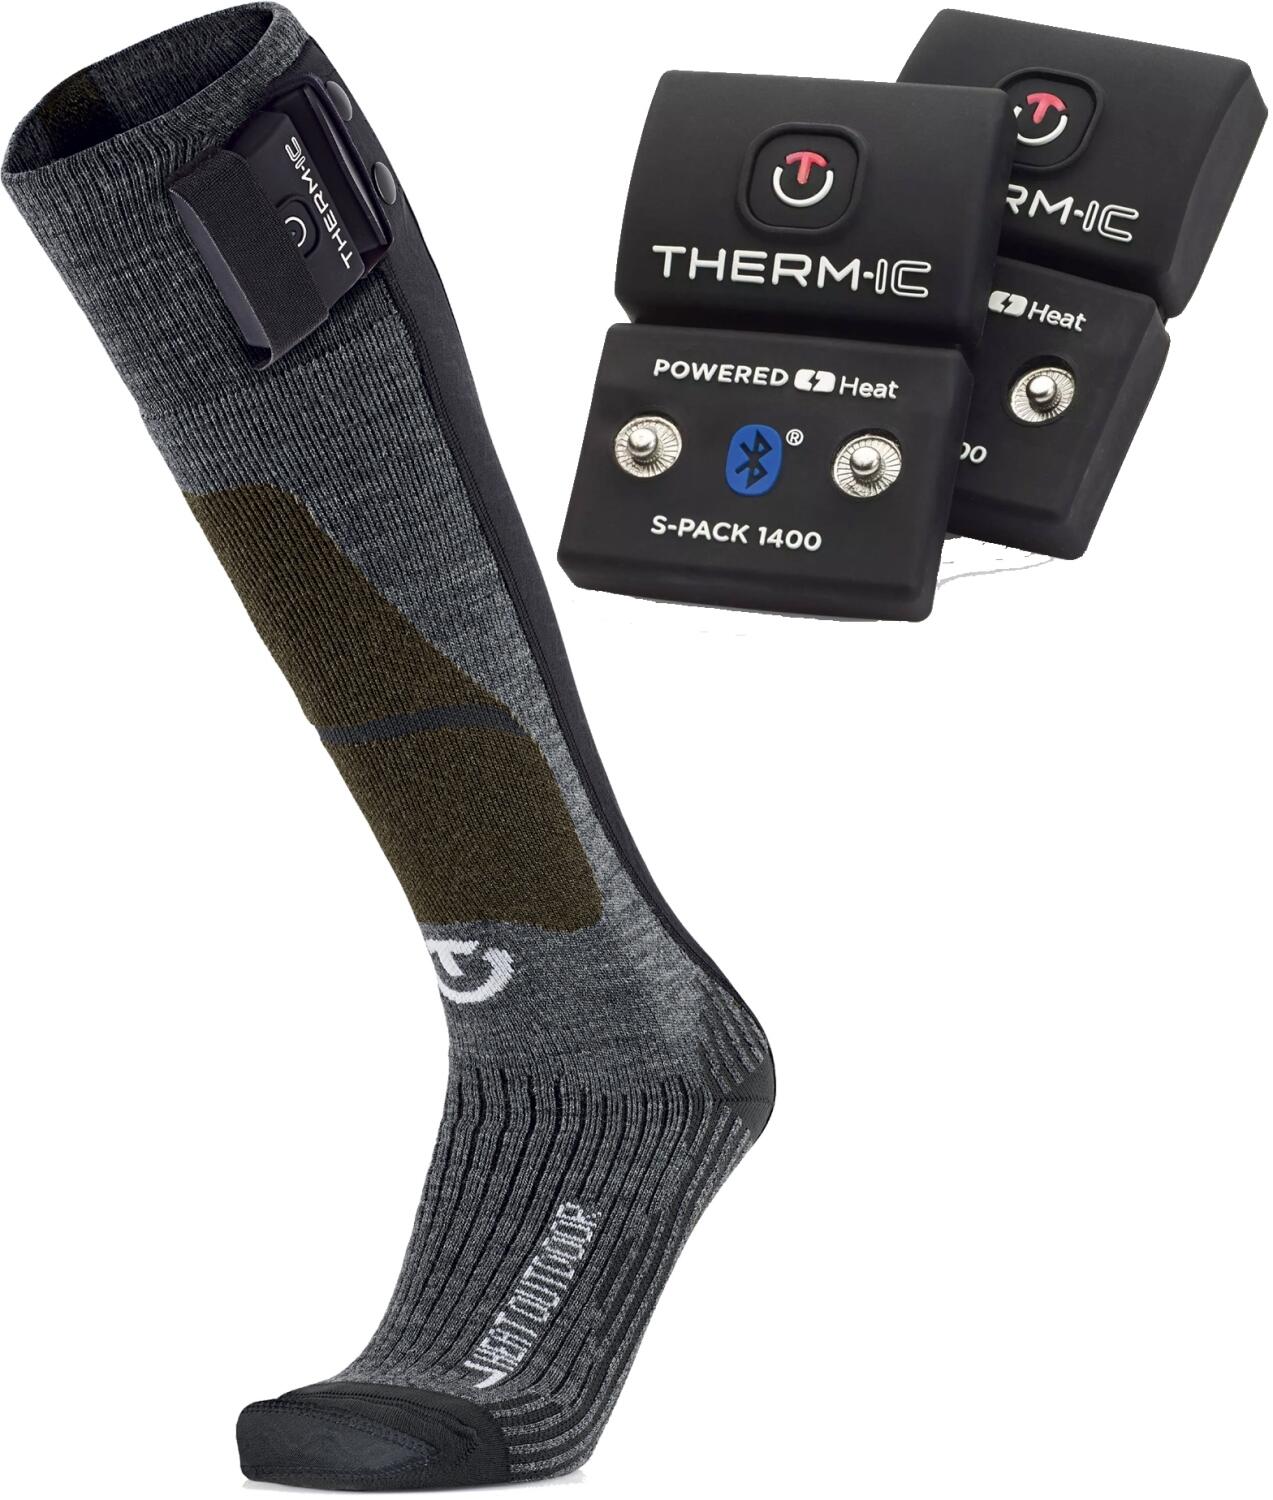 Therm-ic PowerSock Set Heat Fusion Outdoor SPack 1400 BT (39.0 - 41.0, grau)